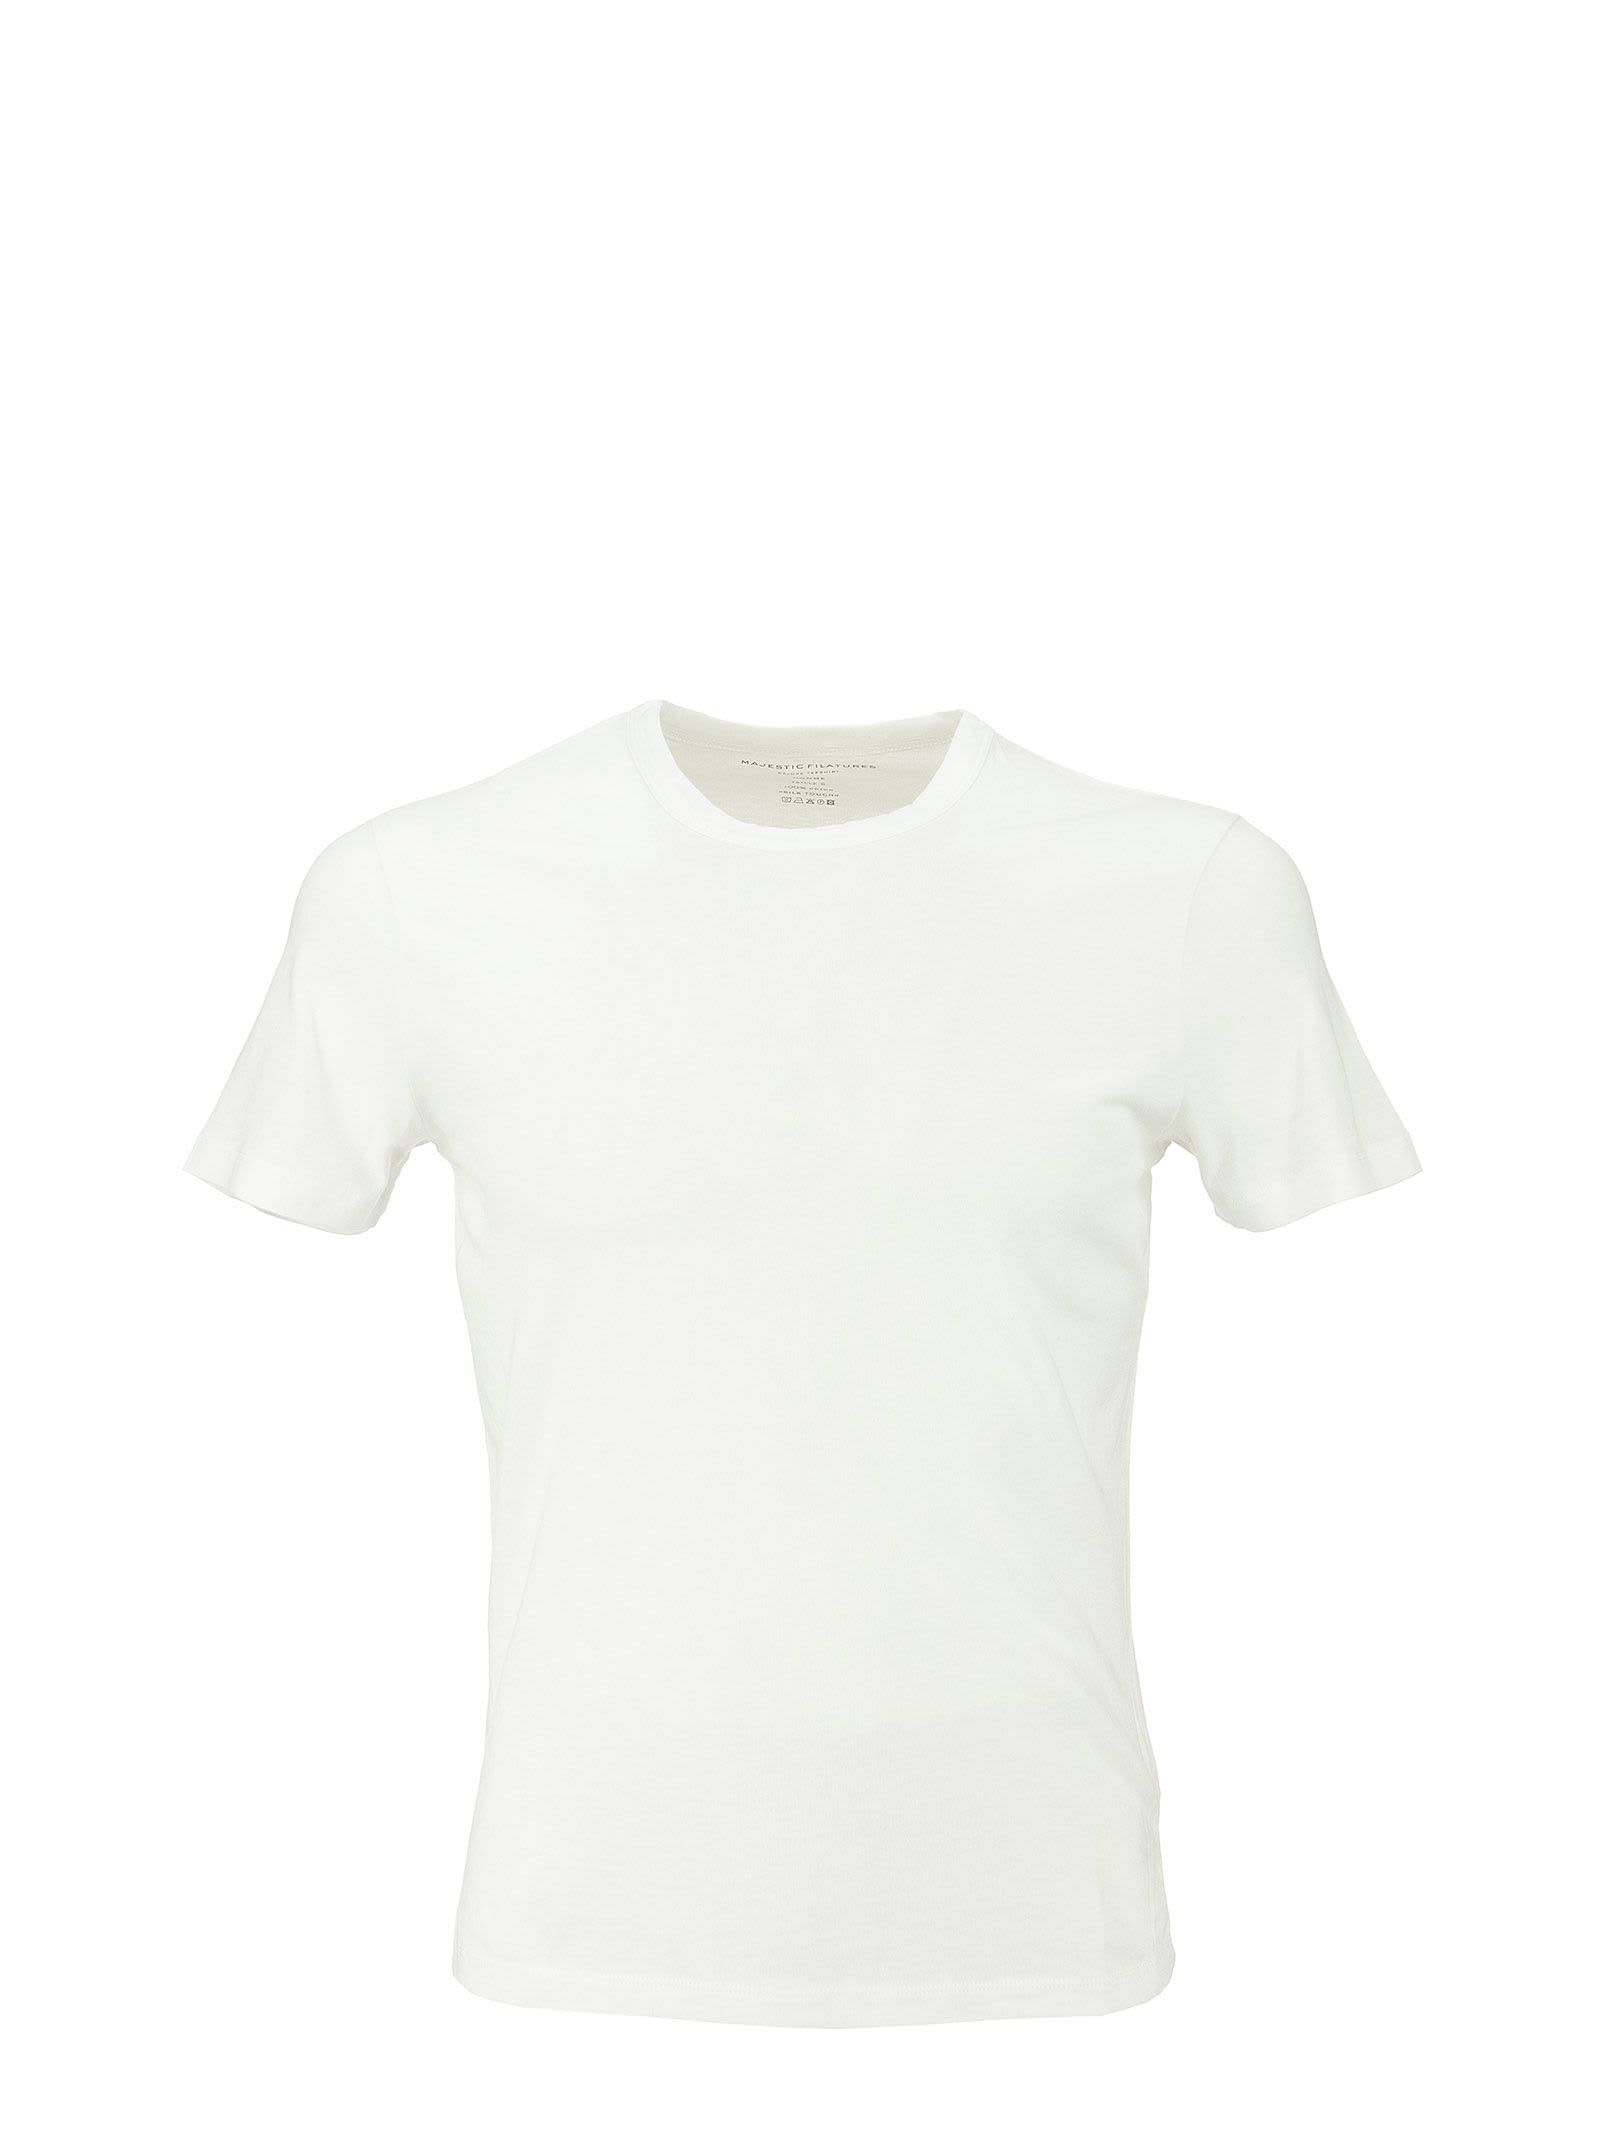 Majestic Filatures White Crew Neck T-shirt In Silk Touch Cotton